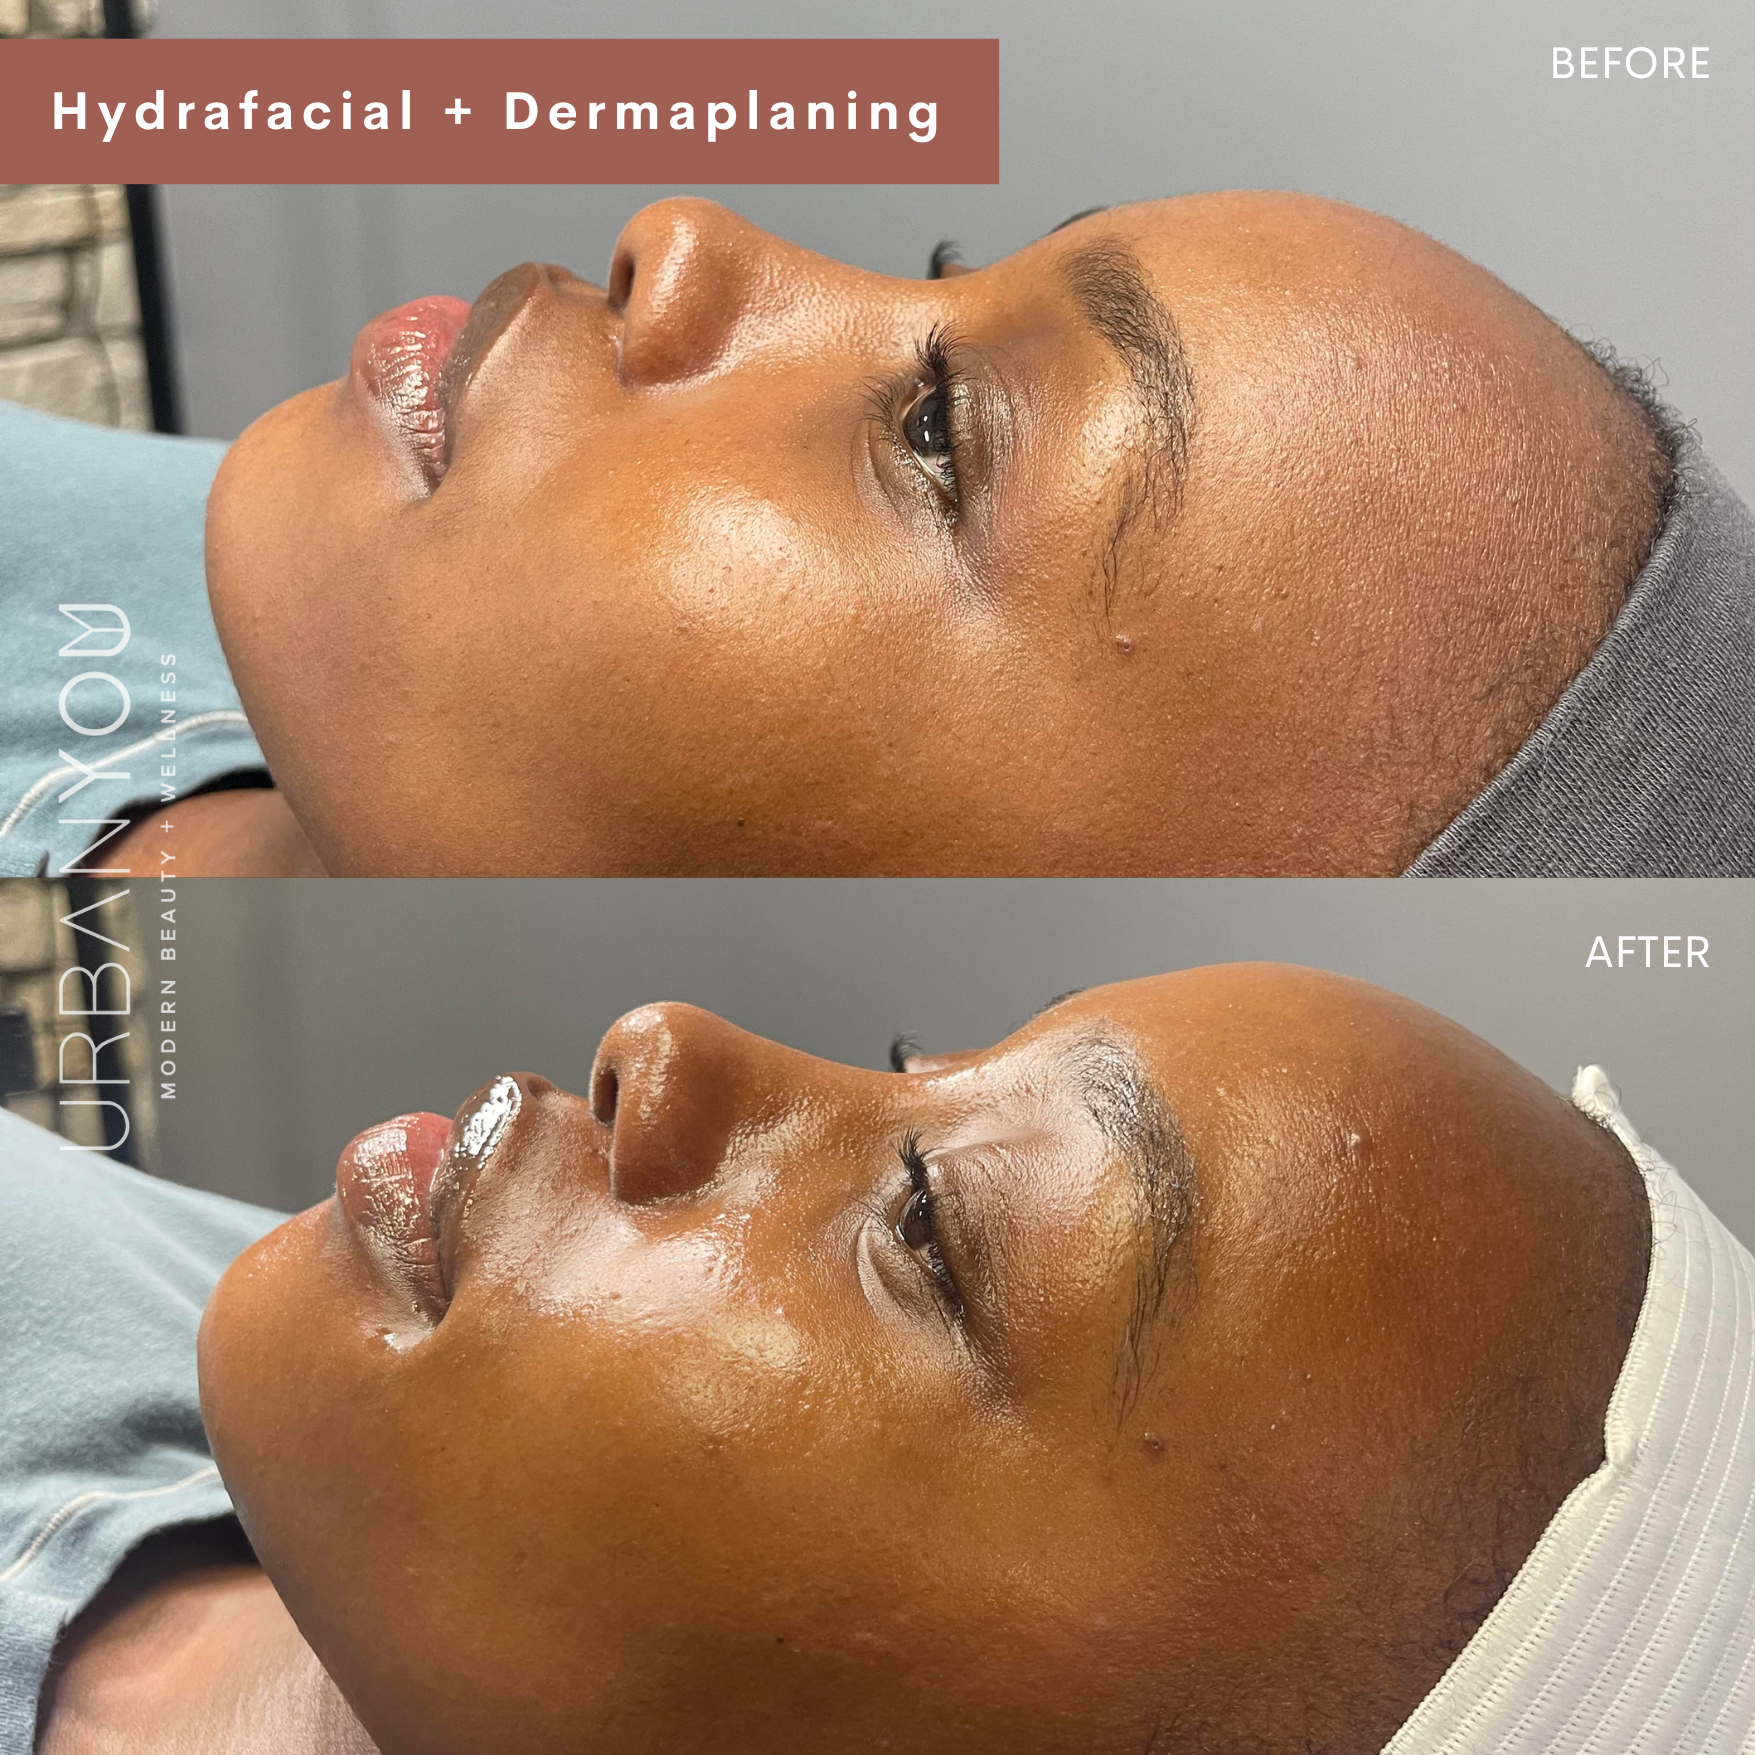 Hydrafacial before and after photo at urban you medical spa in grand rapids and northville, michigan (Copy)